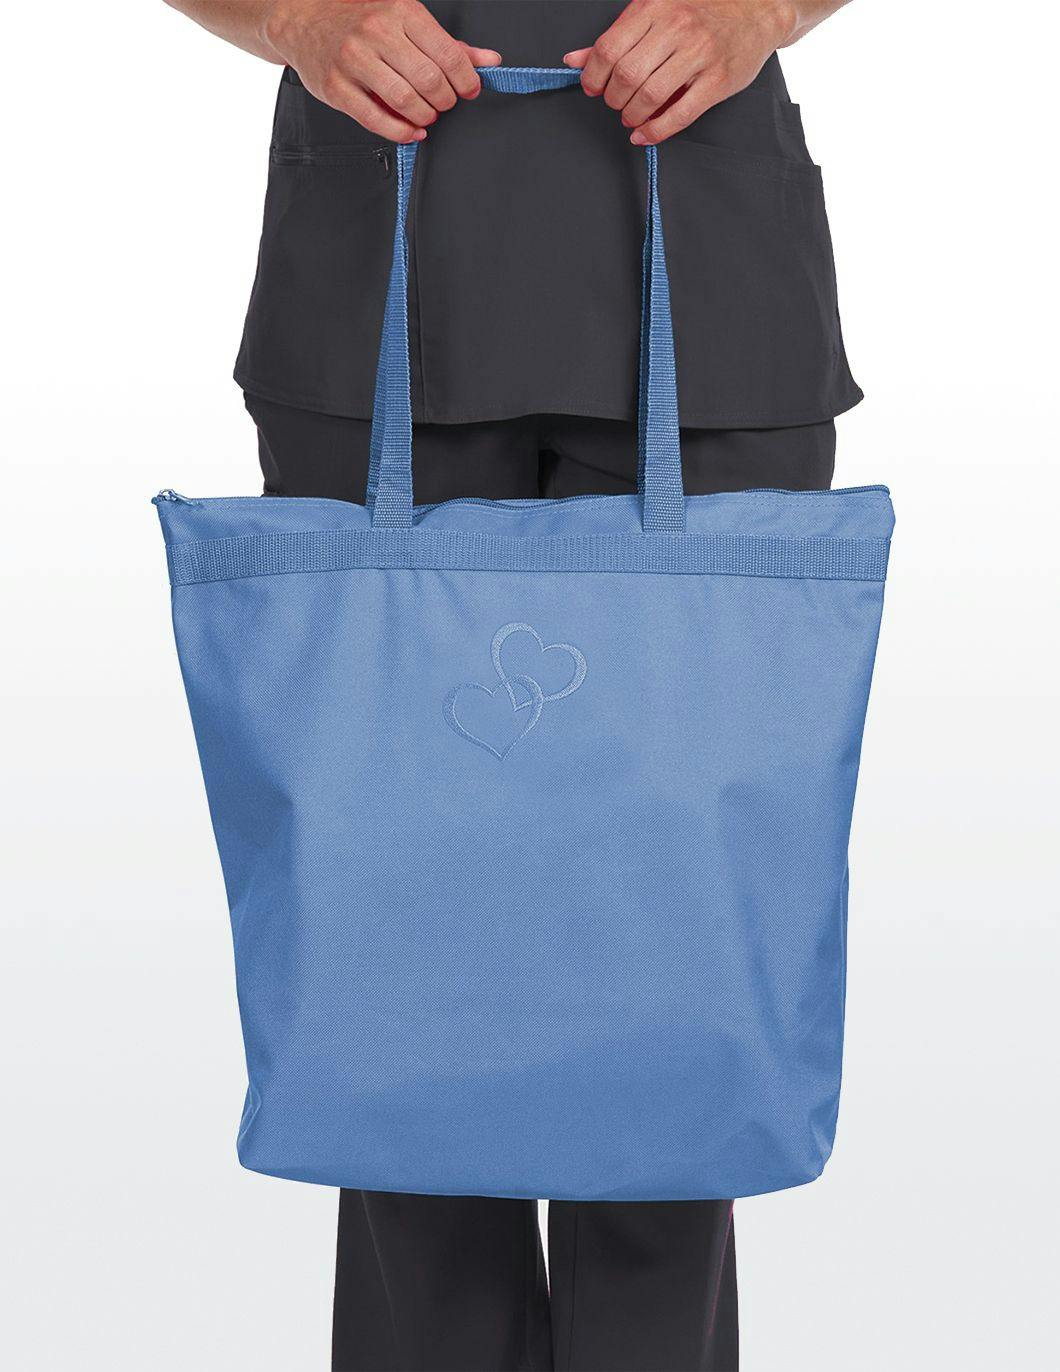 zipper-tote-with-hearts